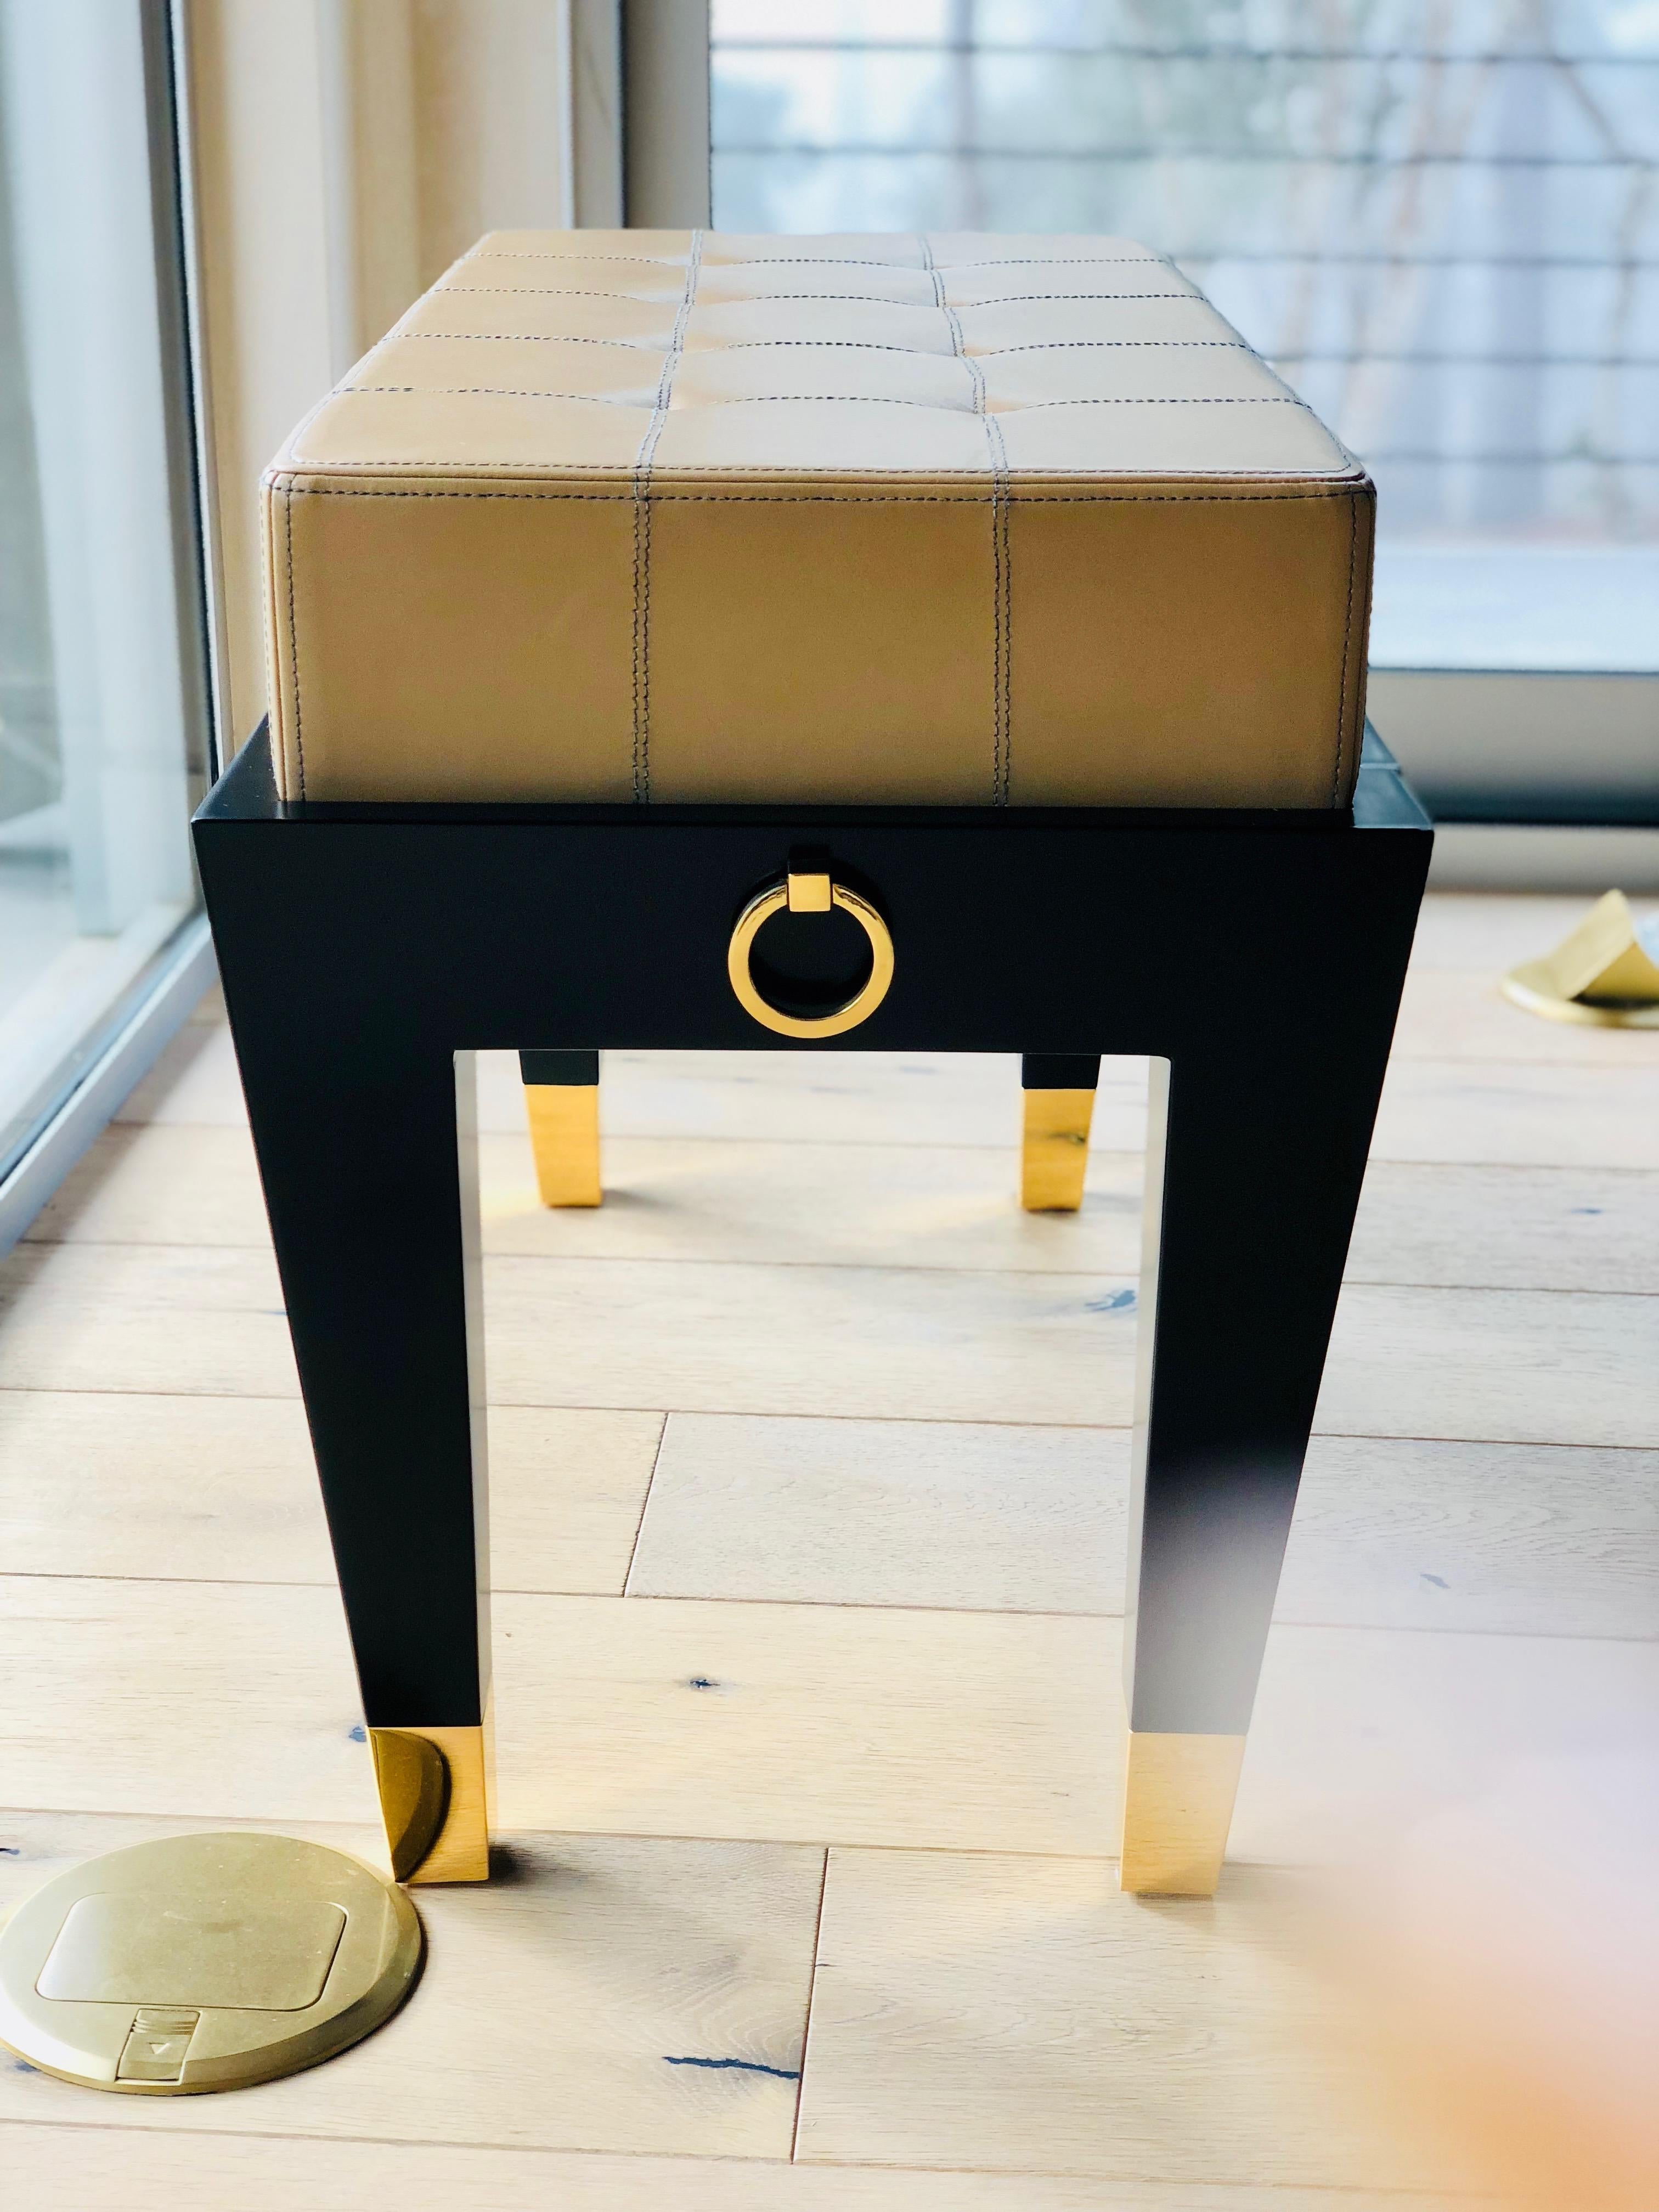 Create your own custom piano bench for a truly gorgeous finish to the piano room. 

The frame is black lacquer polished with a small drawer. The upholstered top is COM COL, tight upholstered with double seaming. Brass casters and gold ring detail.